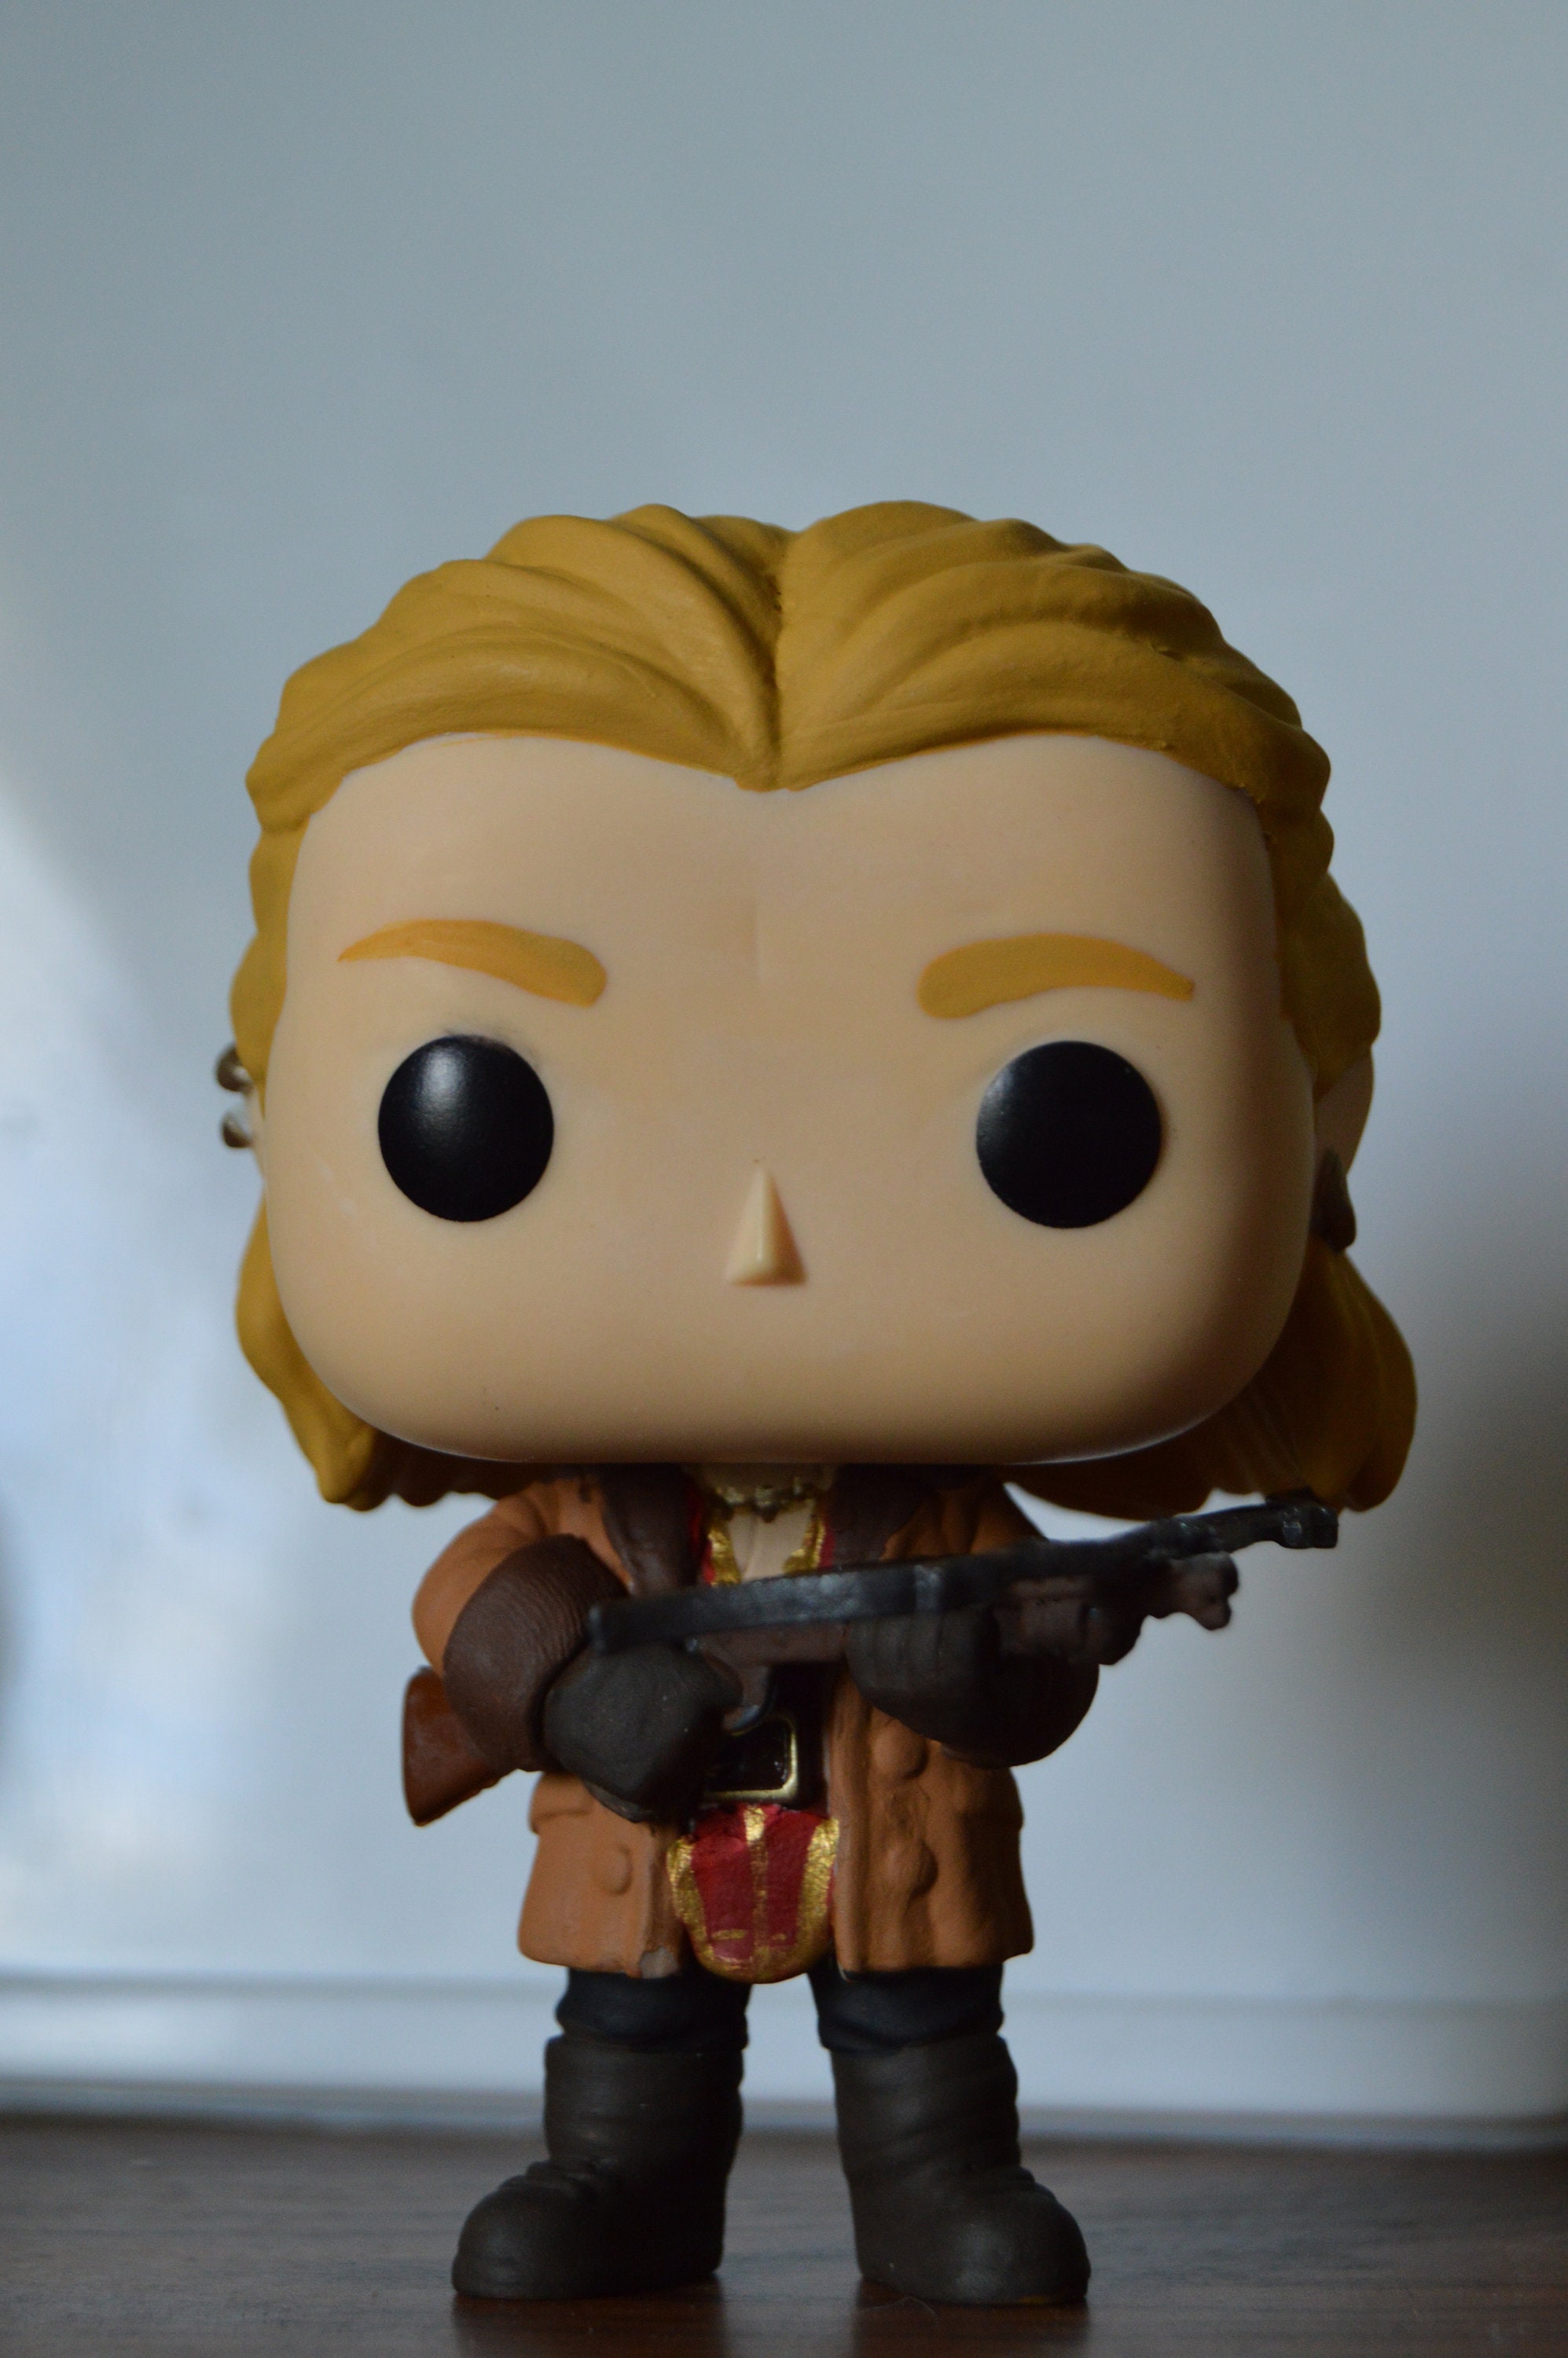 Varric From Dragon Age 2 and Inquisition Pop Vinyl - Etsy